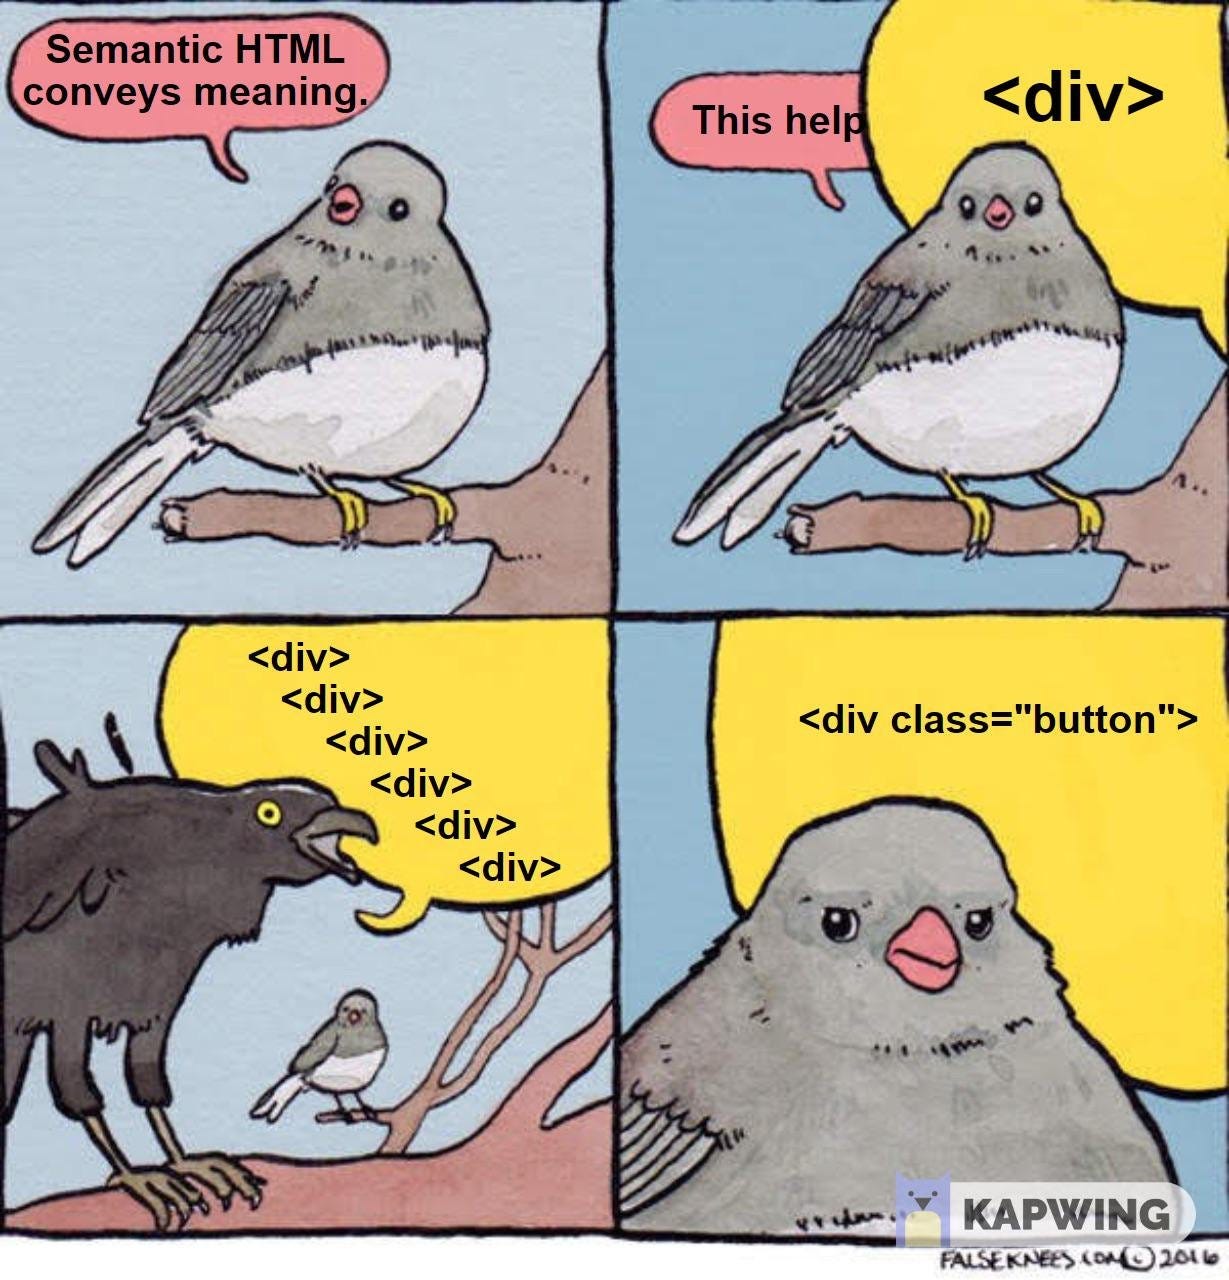 Semantic HTML conveys meaning, until it's overwhelmed by crows with <div><div><div>